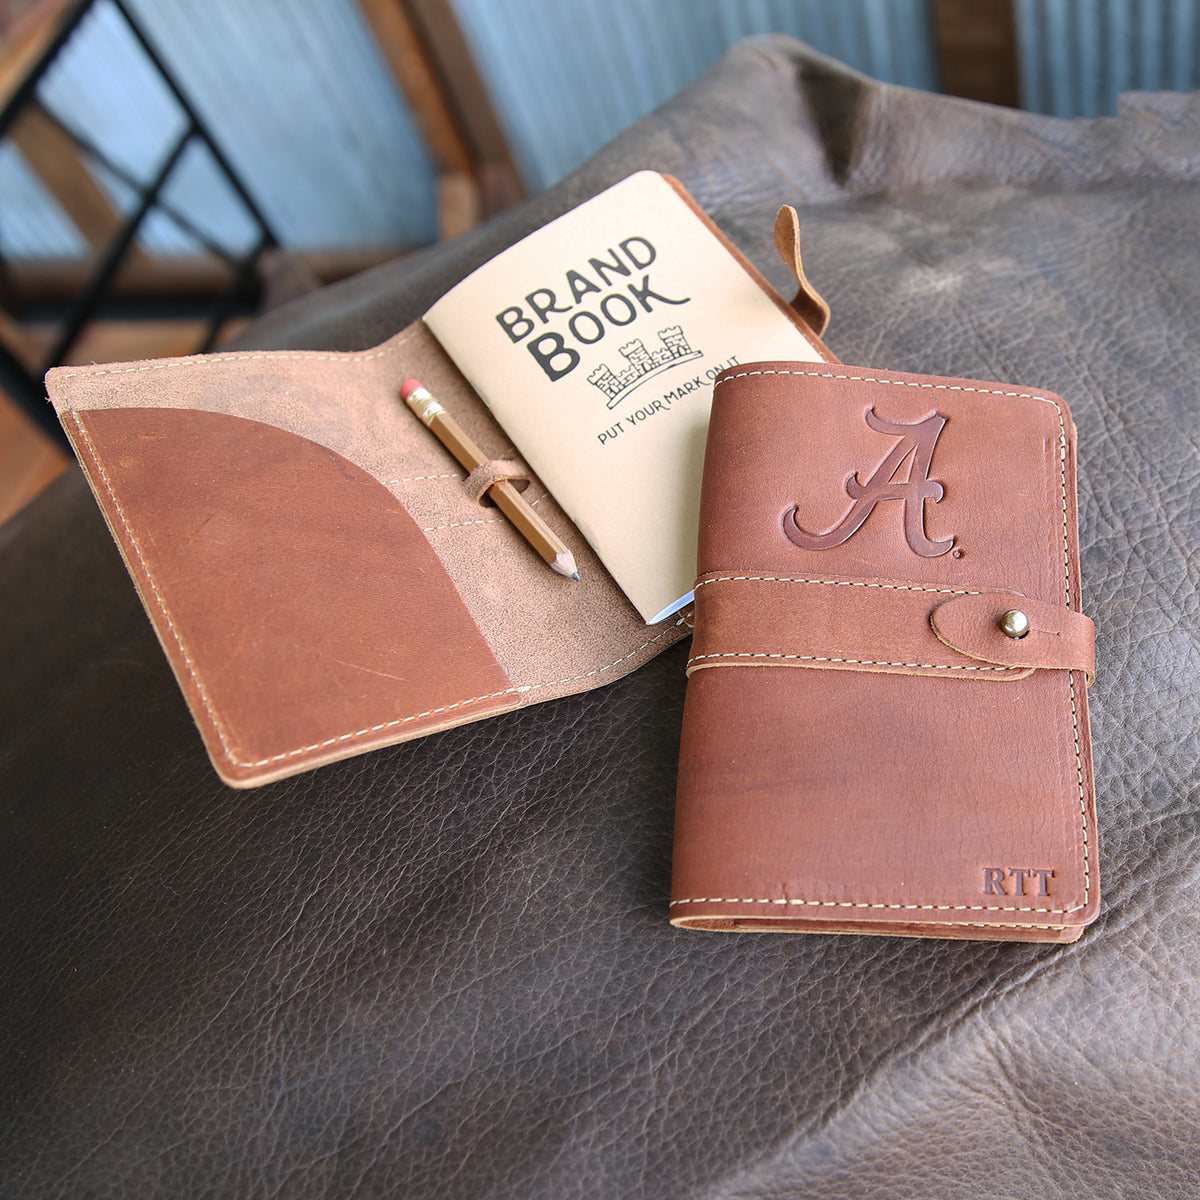 The Officially Licensed Alabama Surveyor Fine Leather Pocket Journal Cover for Field Notes